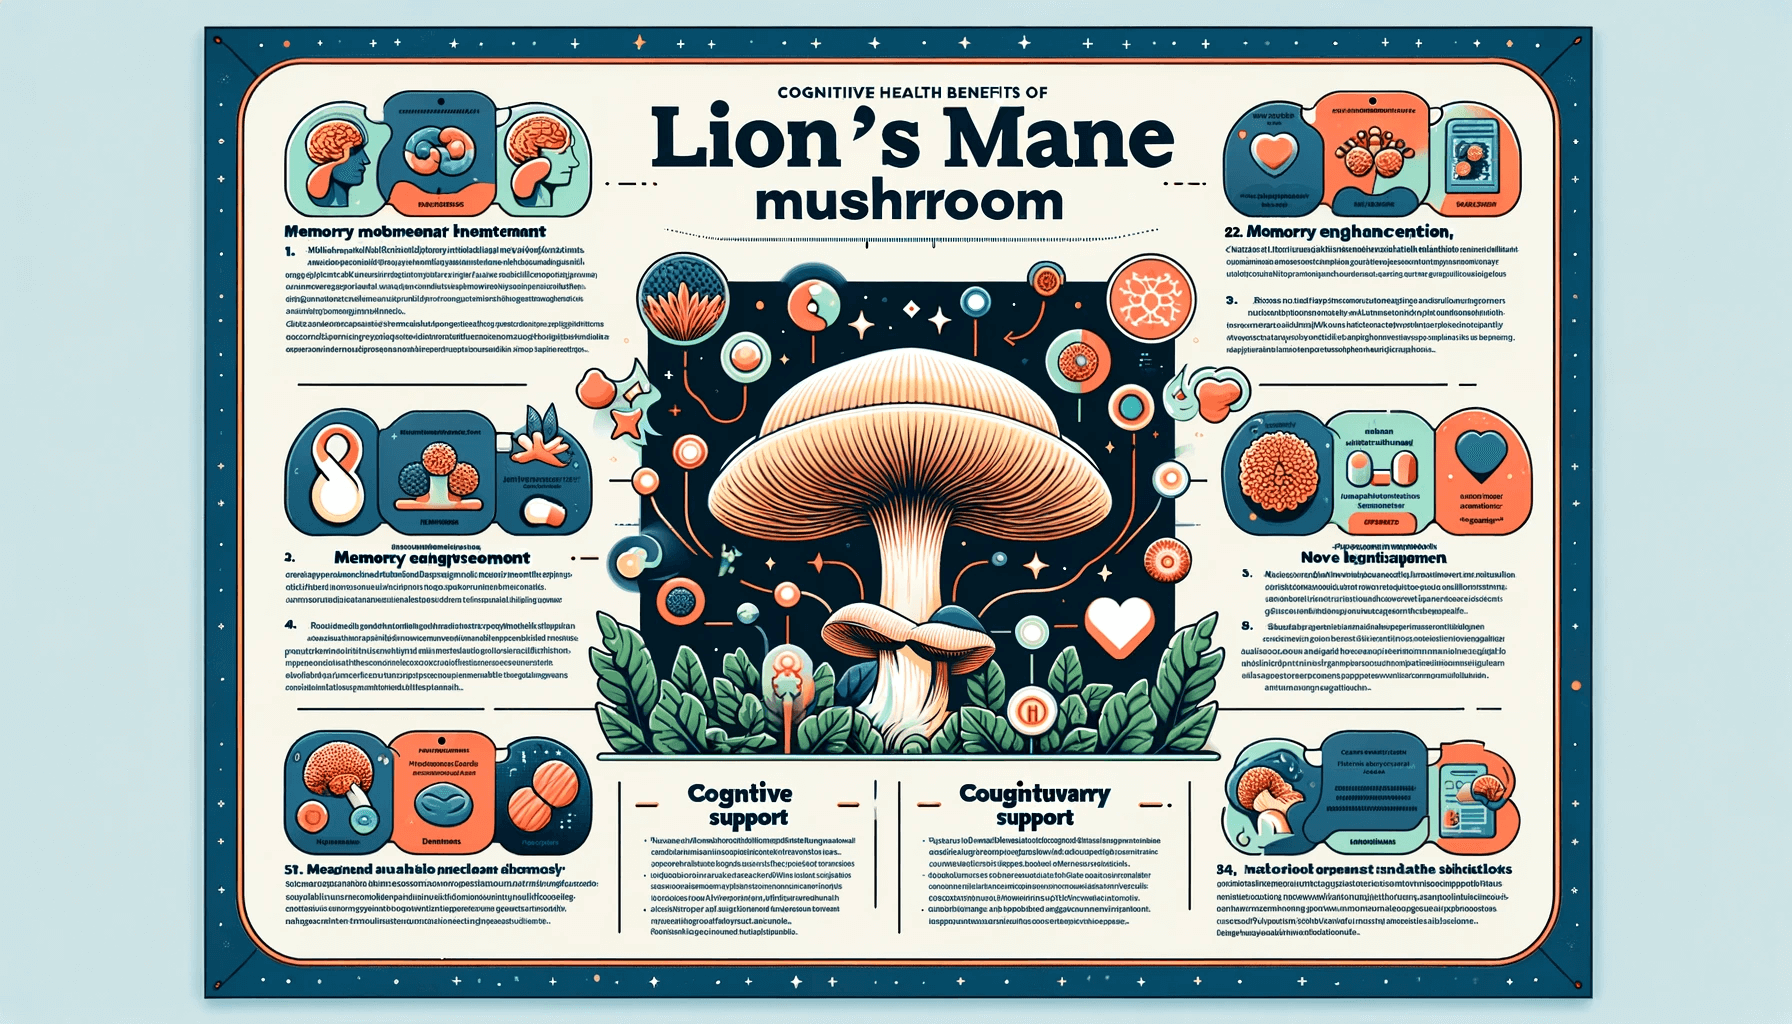 Infographic detailing the cognitive and neurological health benefits of Lion's Mane mushroom, a natural supplement for memory enhancement and nerve growth factor stimulation